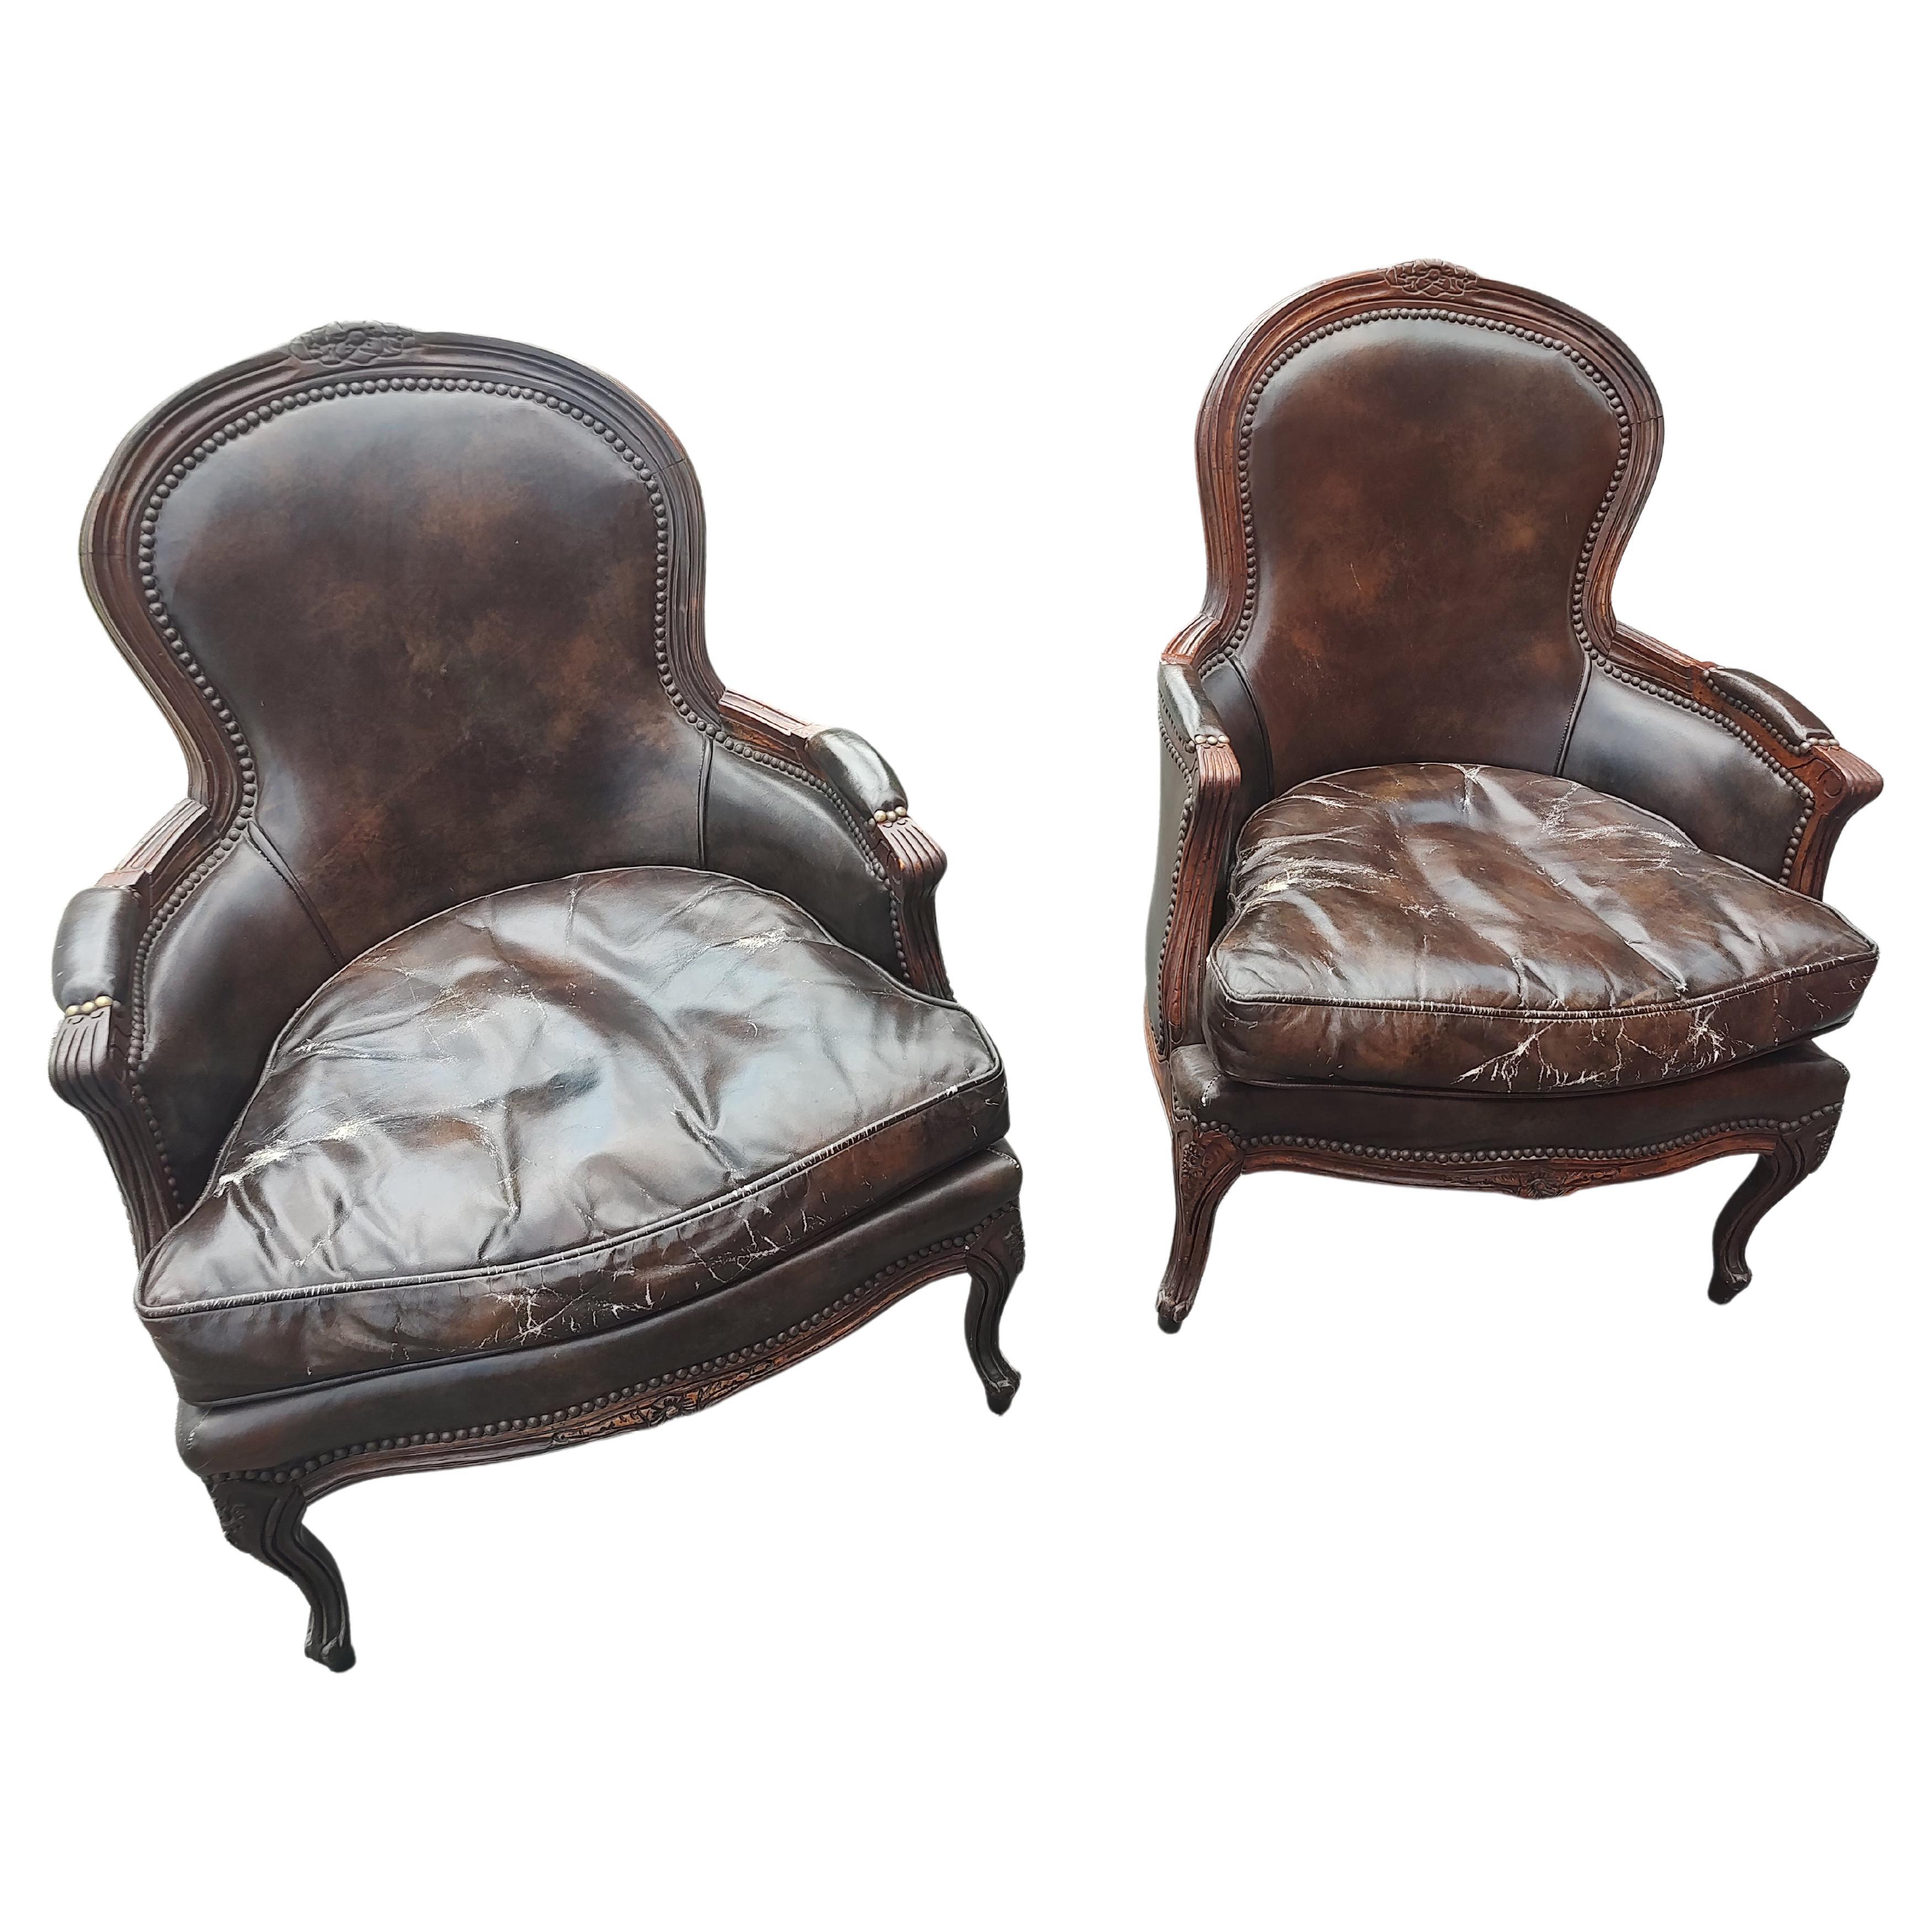 Pair of Midcentury French Bergeres in Brown Leather & Walnut 1965 For Sale 7